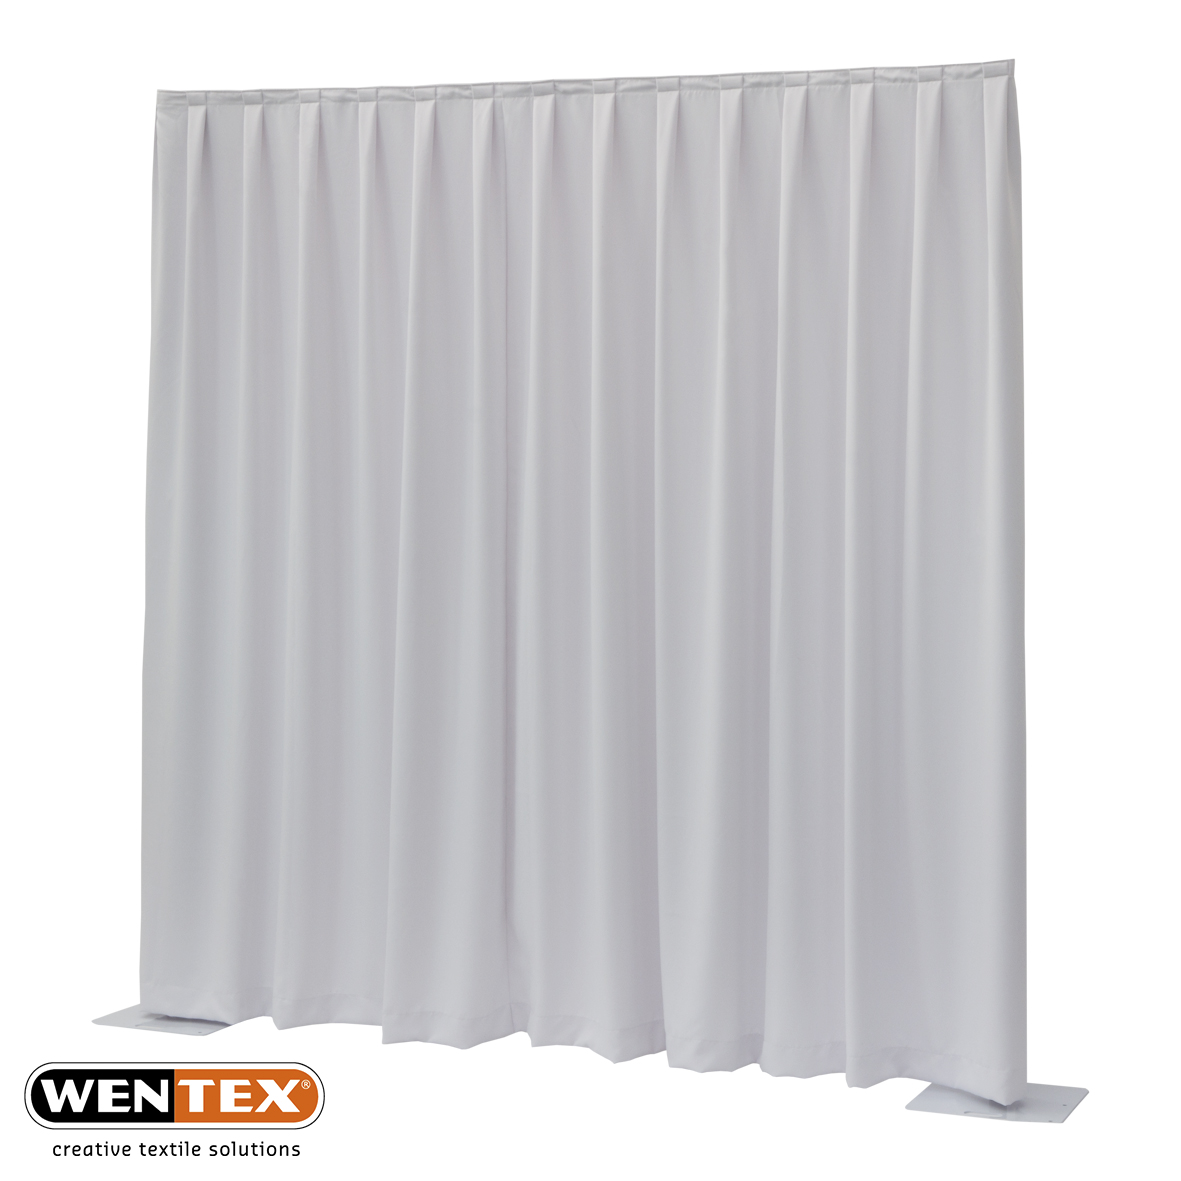 Wentex creative textile solutions - Products